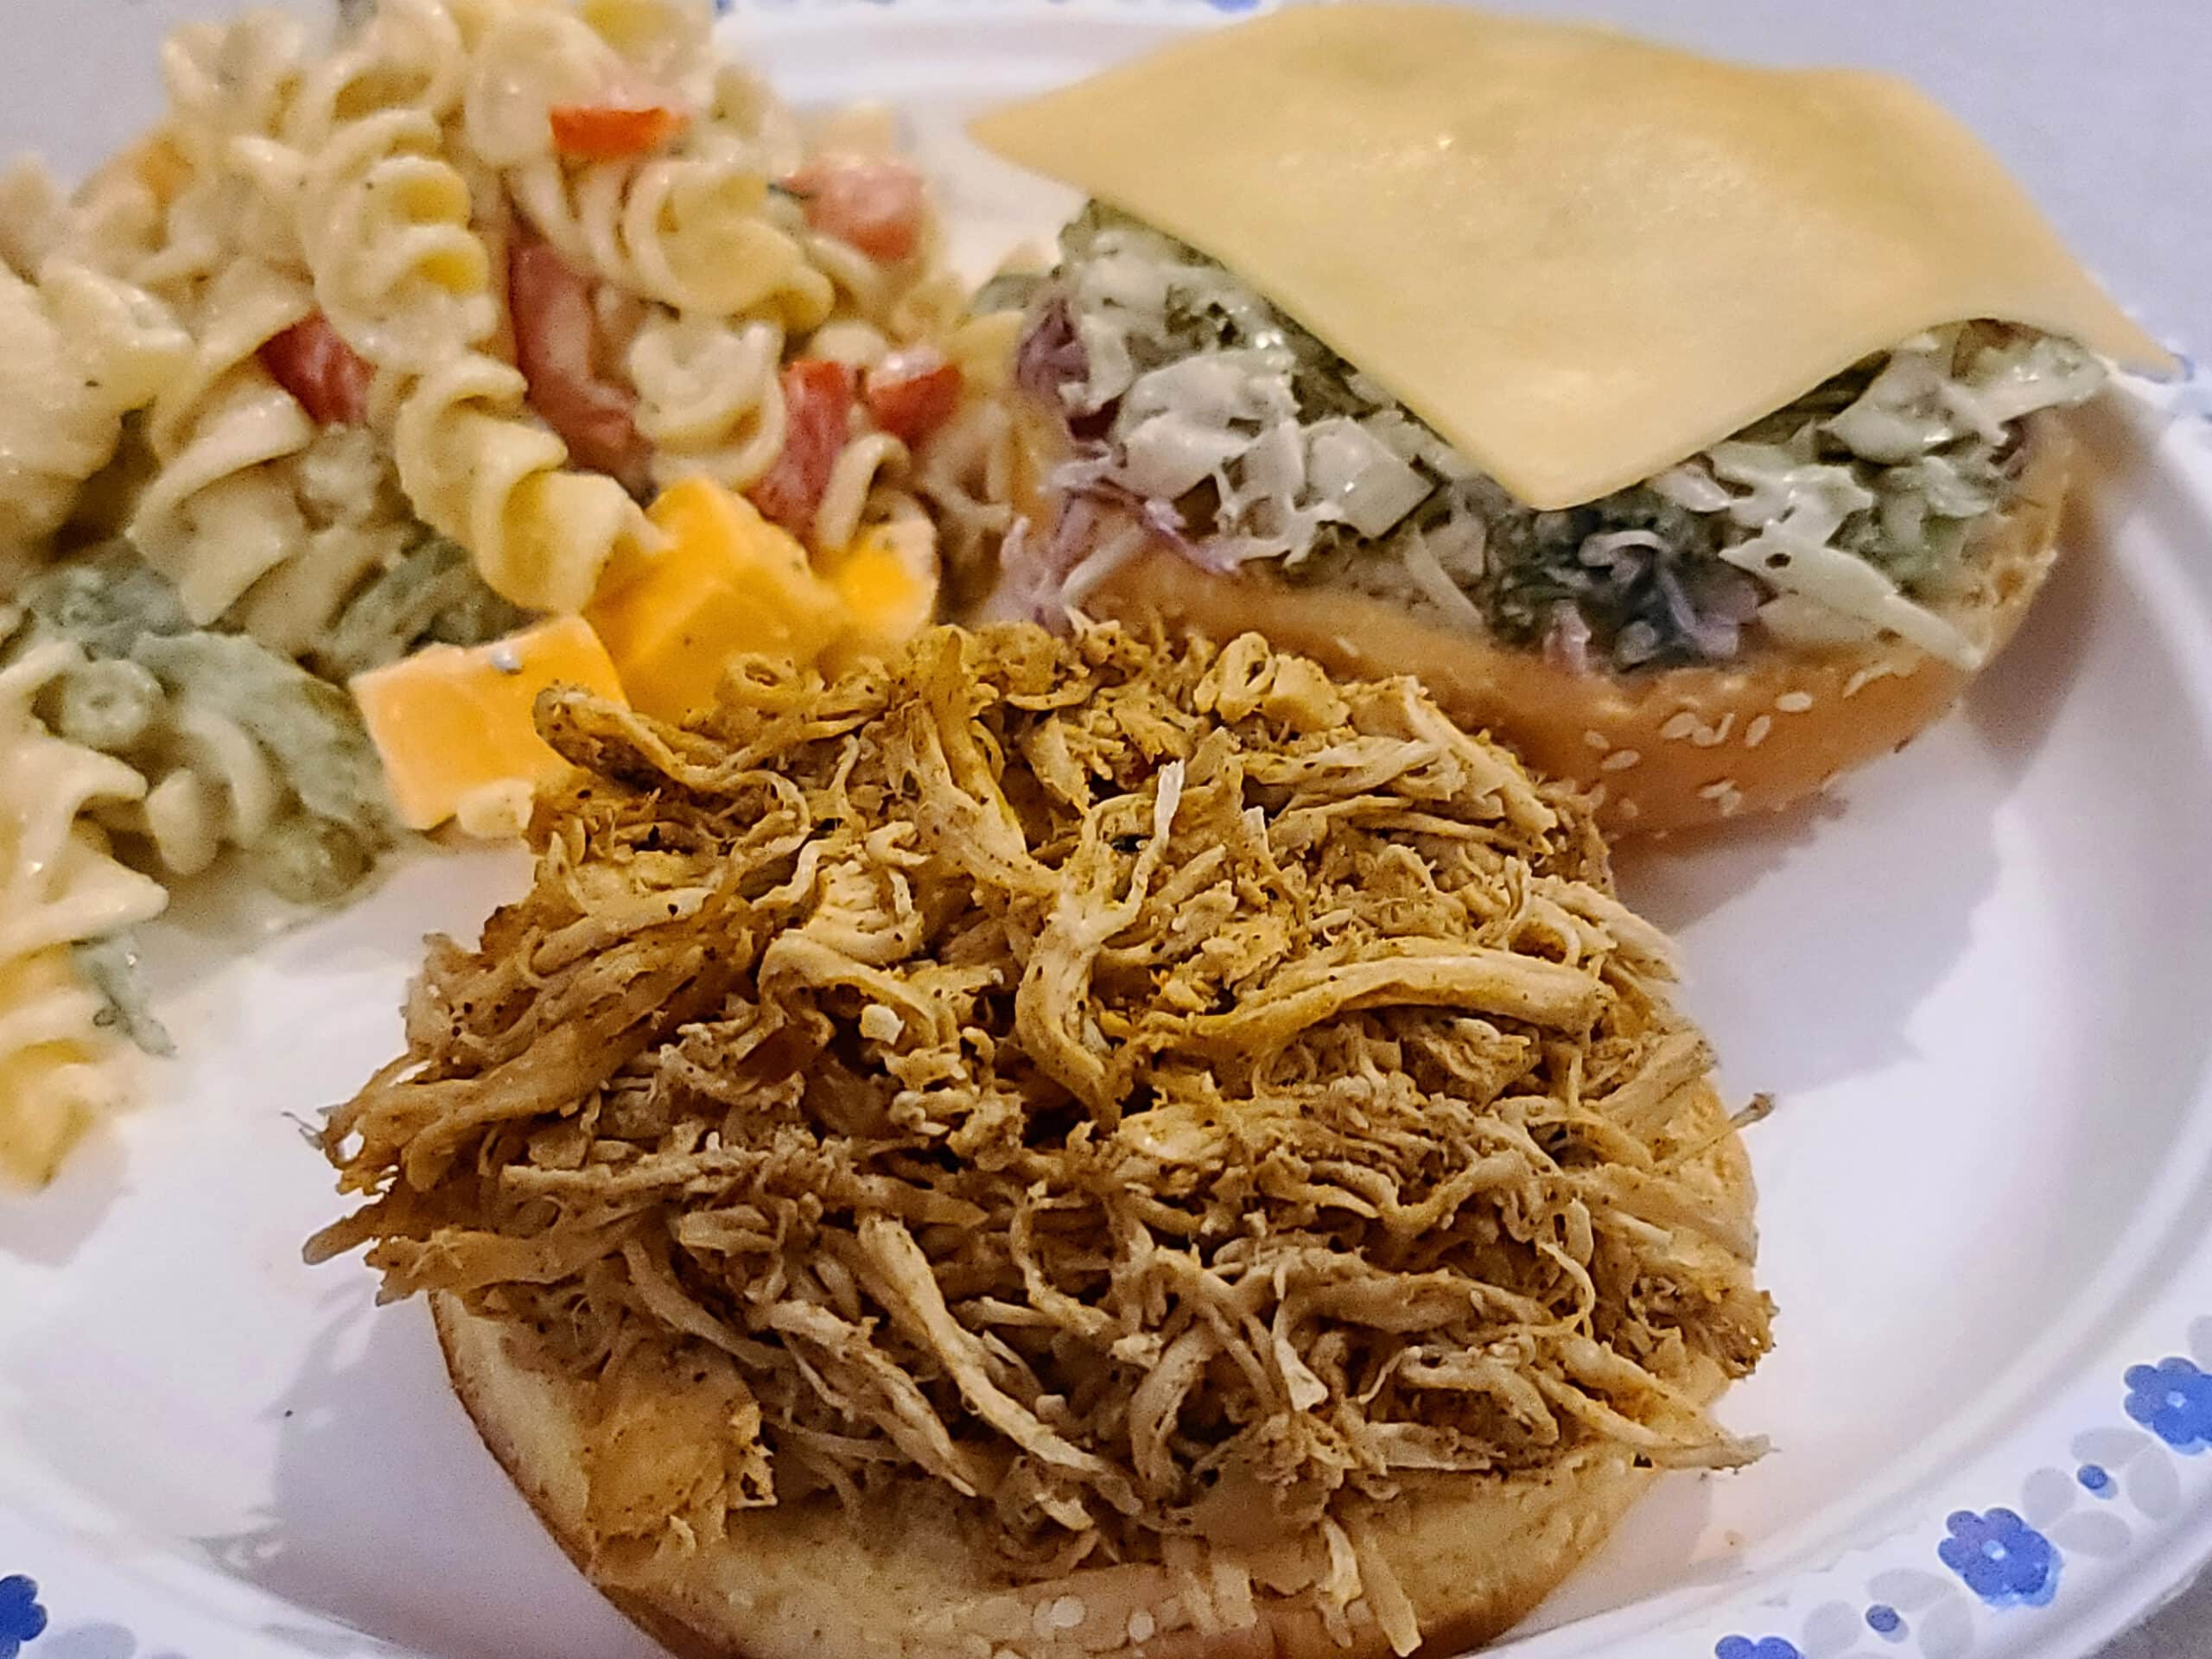 A BBQ pulled chicken sandwich on a plate with macaroni salad.